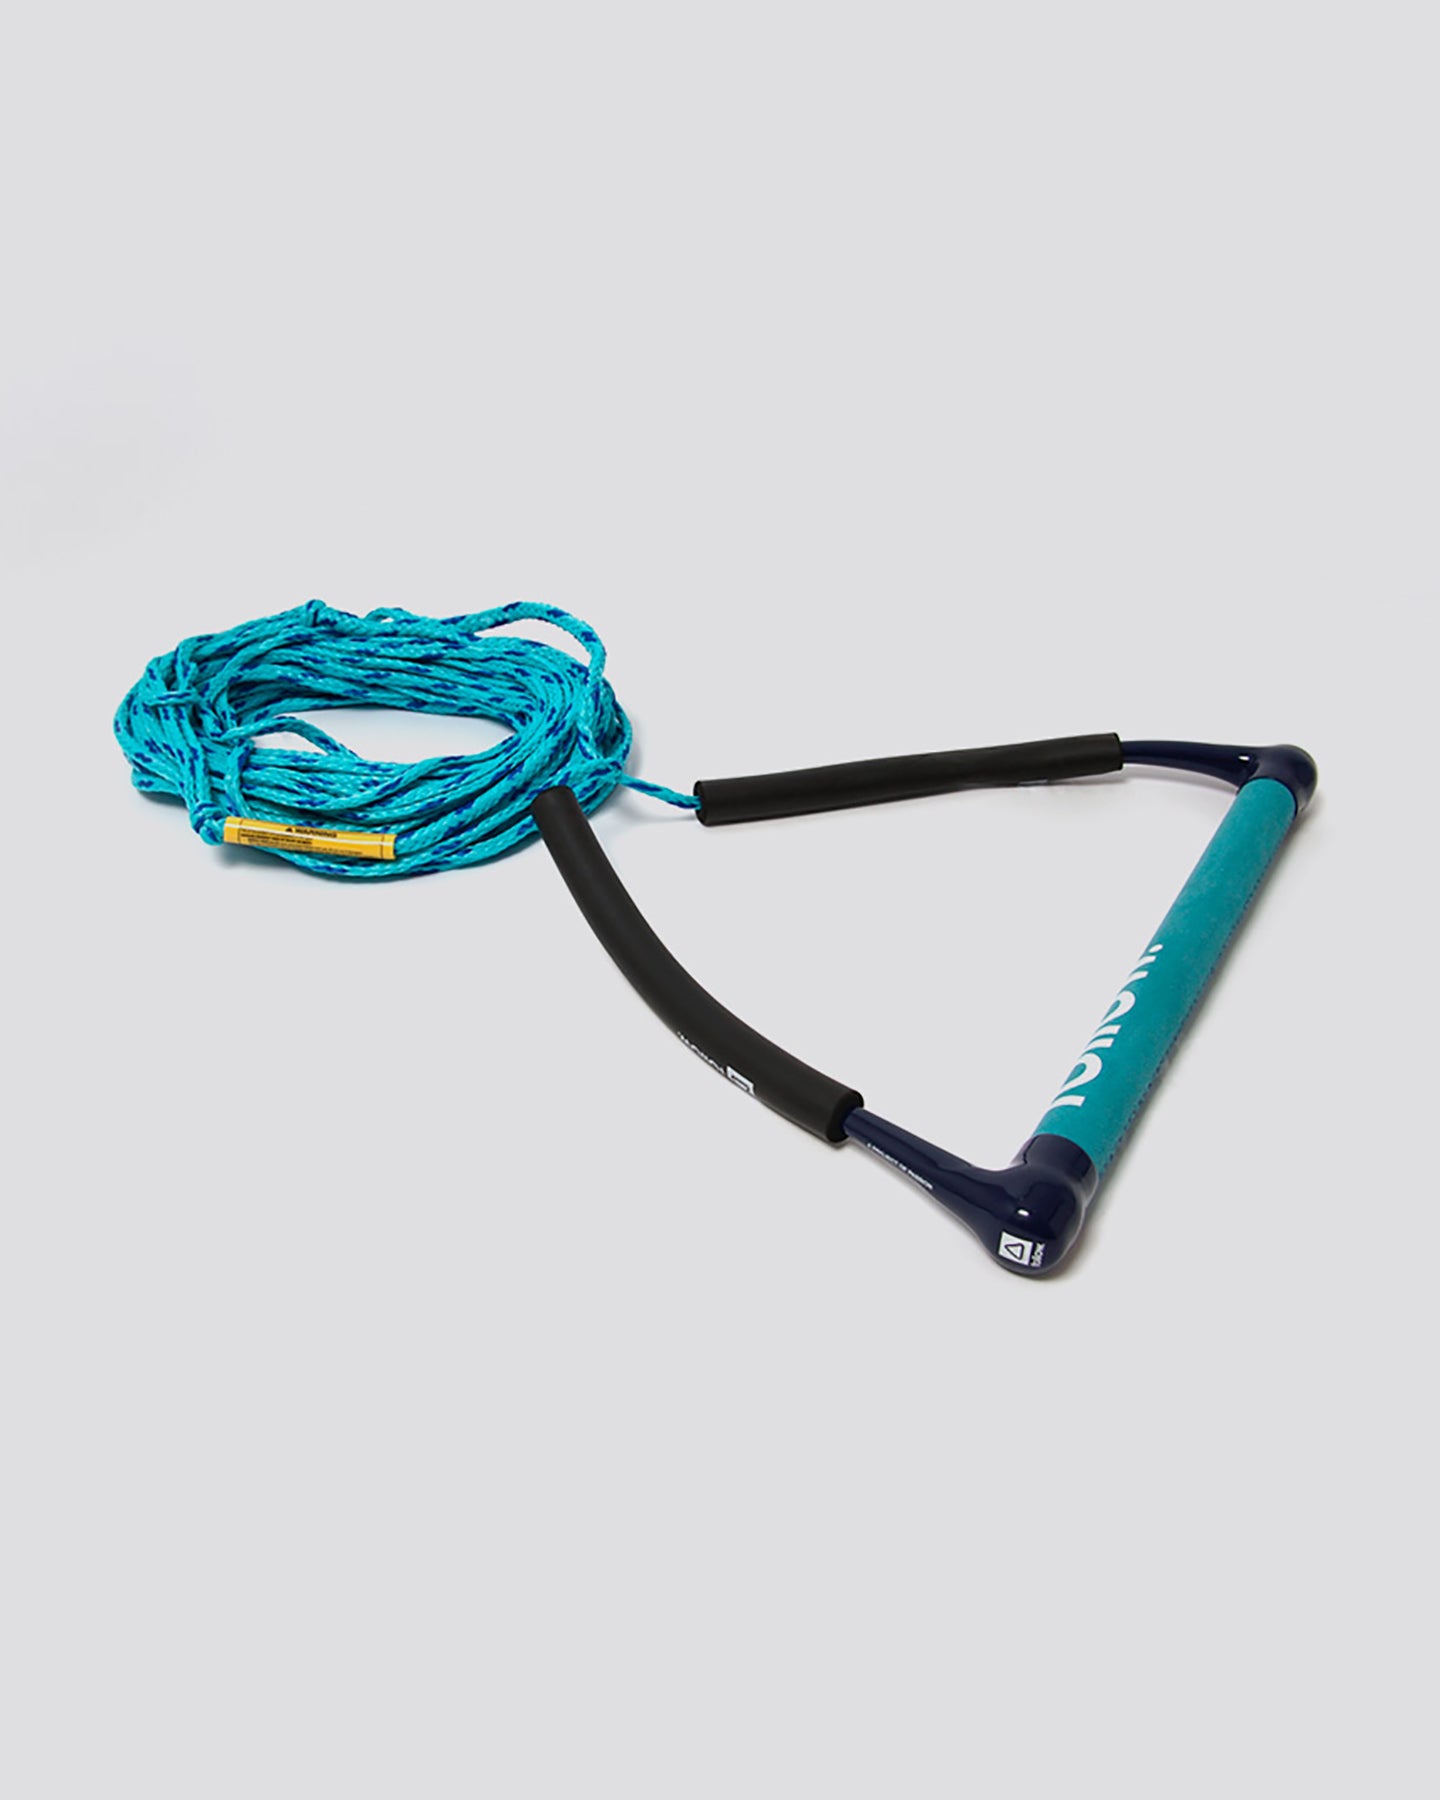 The Basic Package - Teal 1 lifestyle